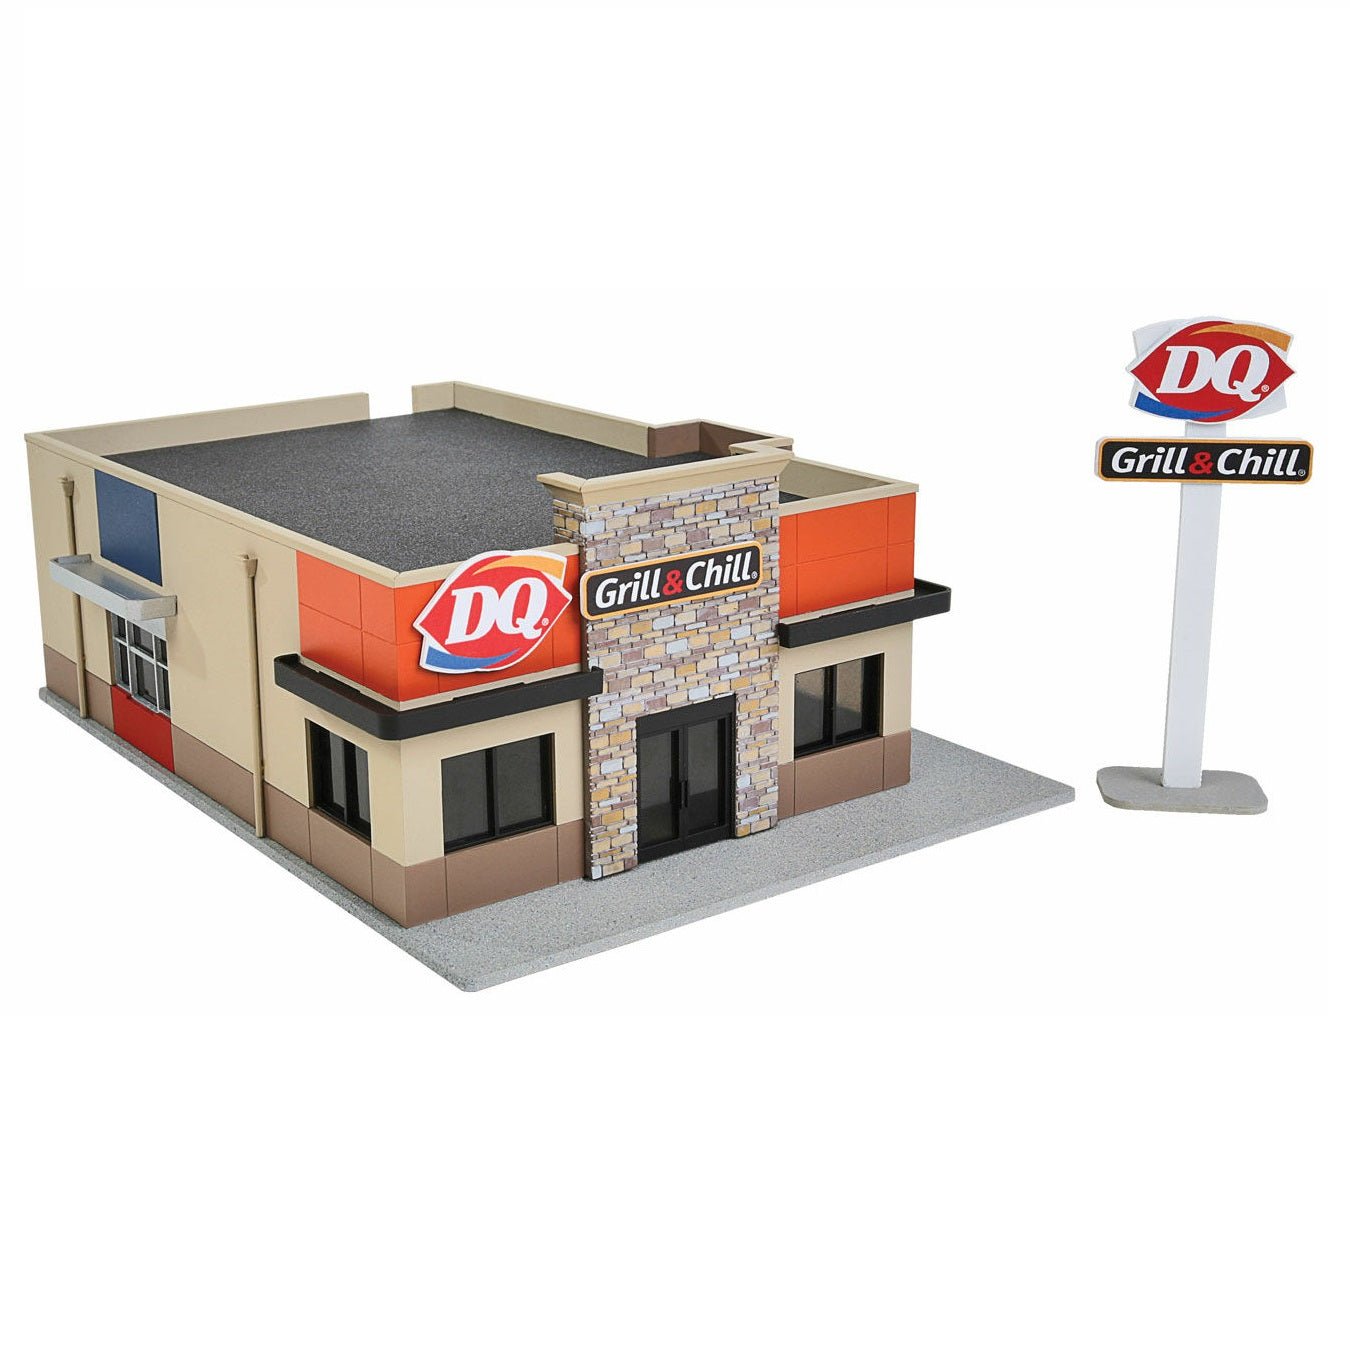 WalthersCornerstone DQ Grill & Chill® Structure Kit, HO Scale